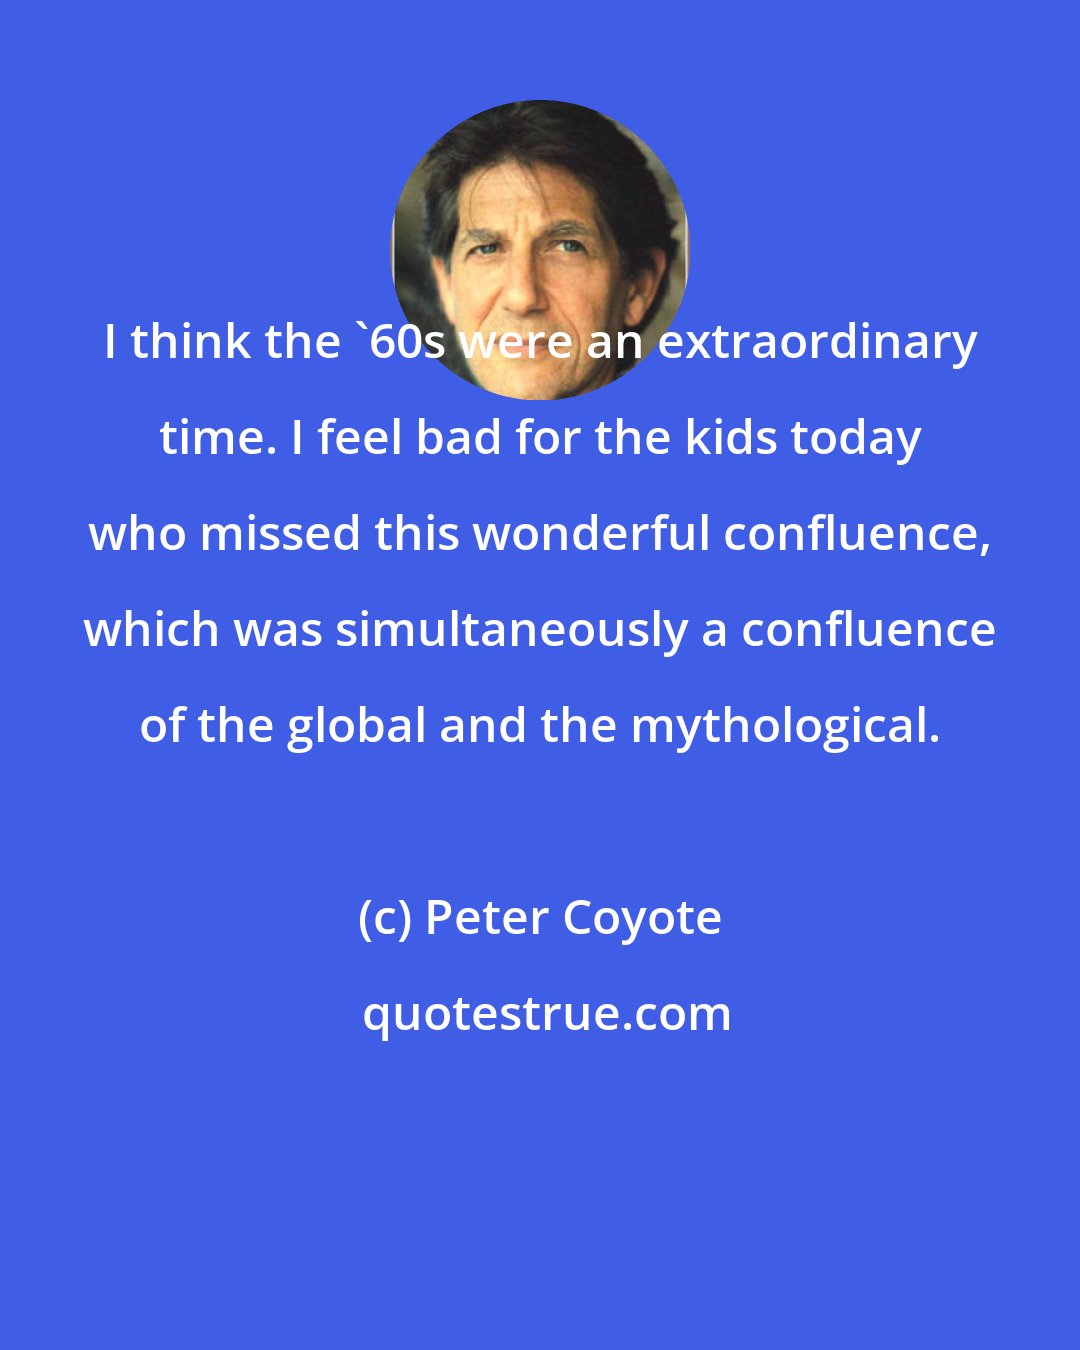 Peter Coyote: I think the '60s were an extraordinary time. I feel bad for the kids today who missed this wonderful confluence, which was simultaneously a confluence of the global and the mythological.